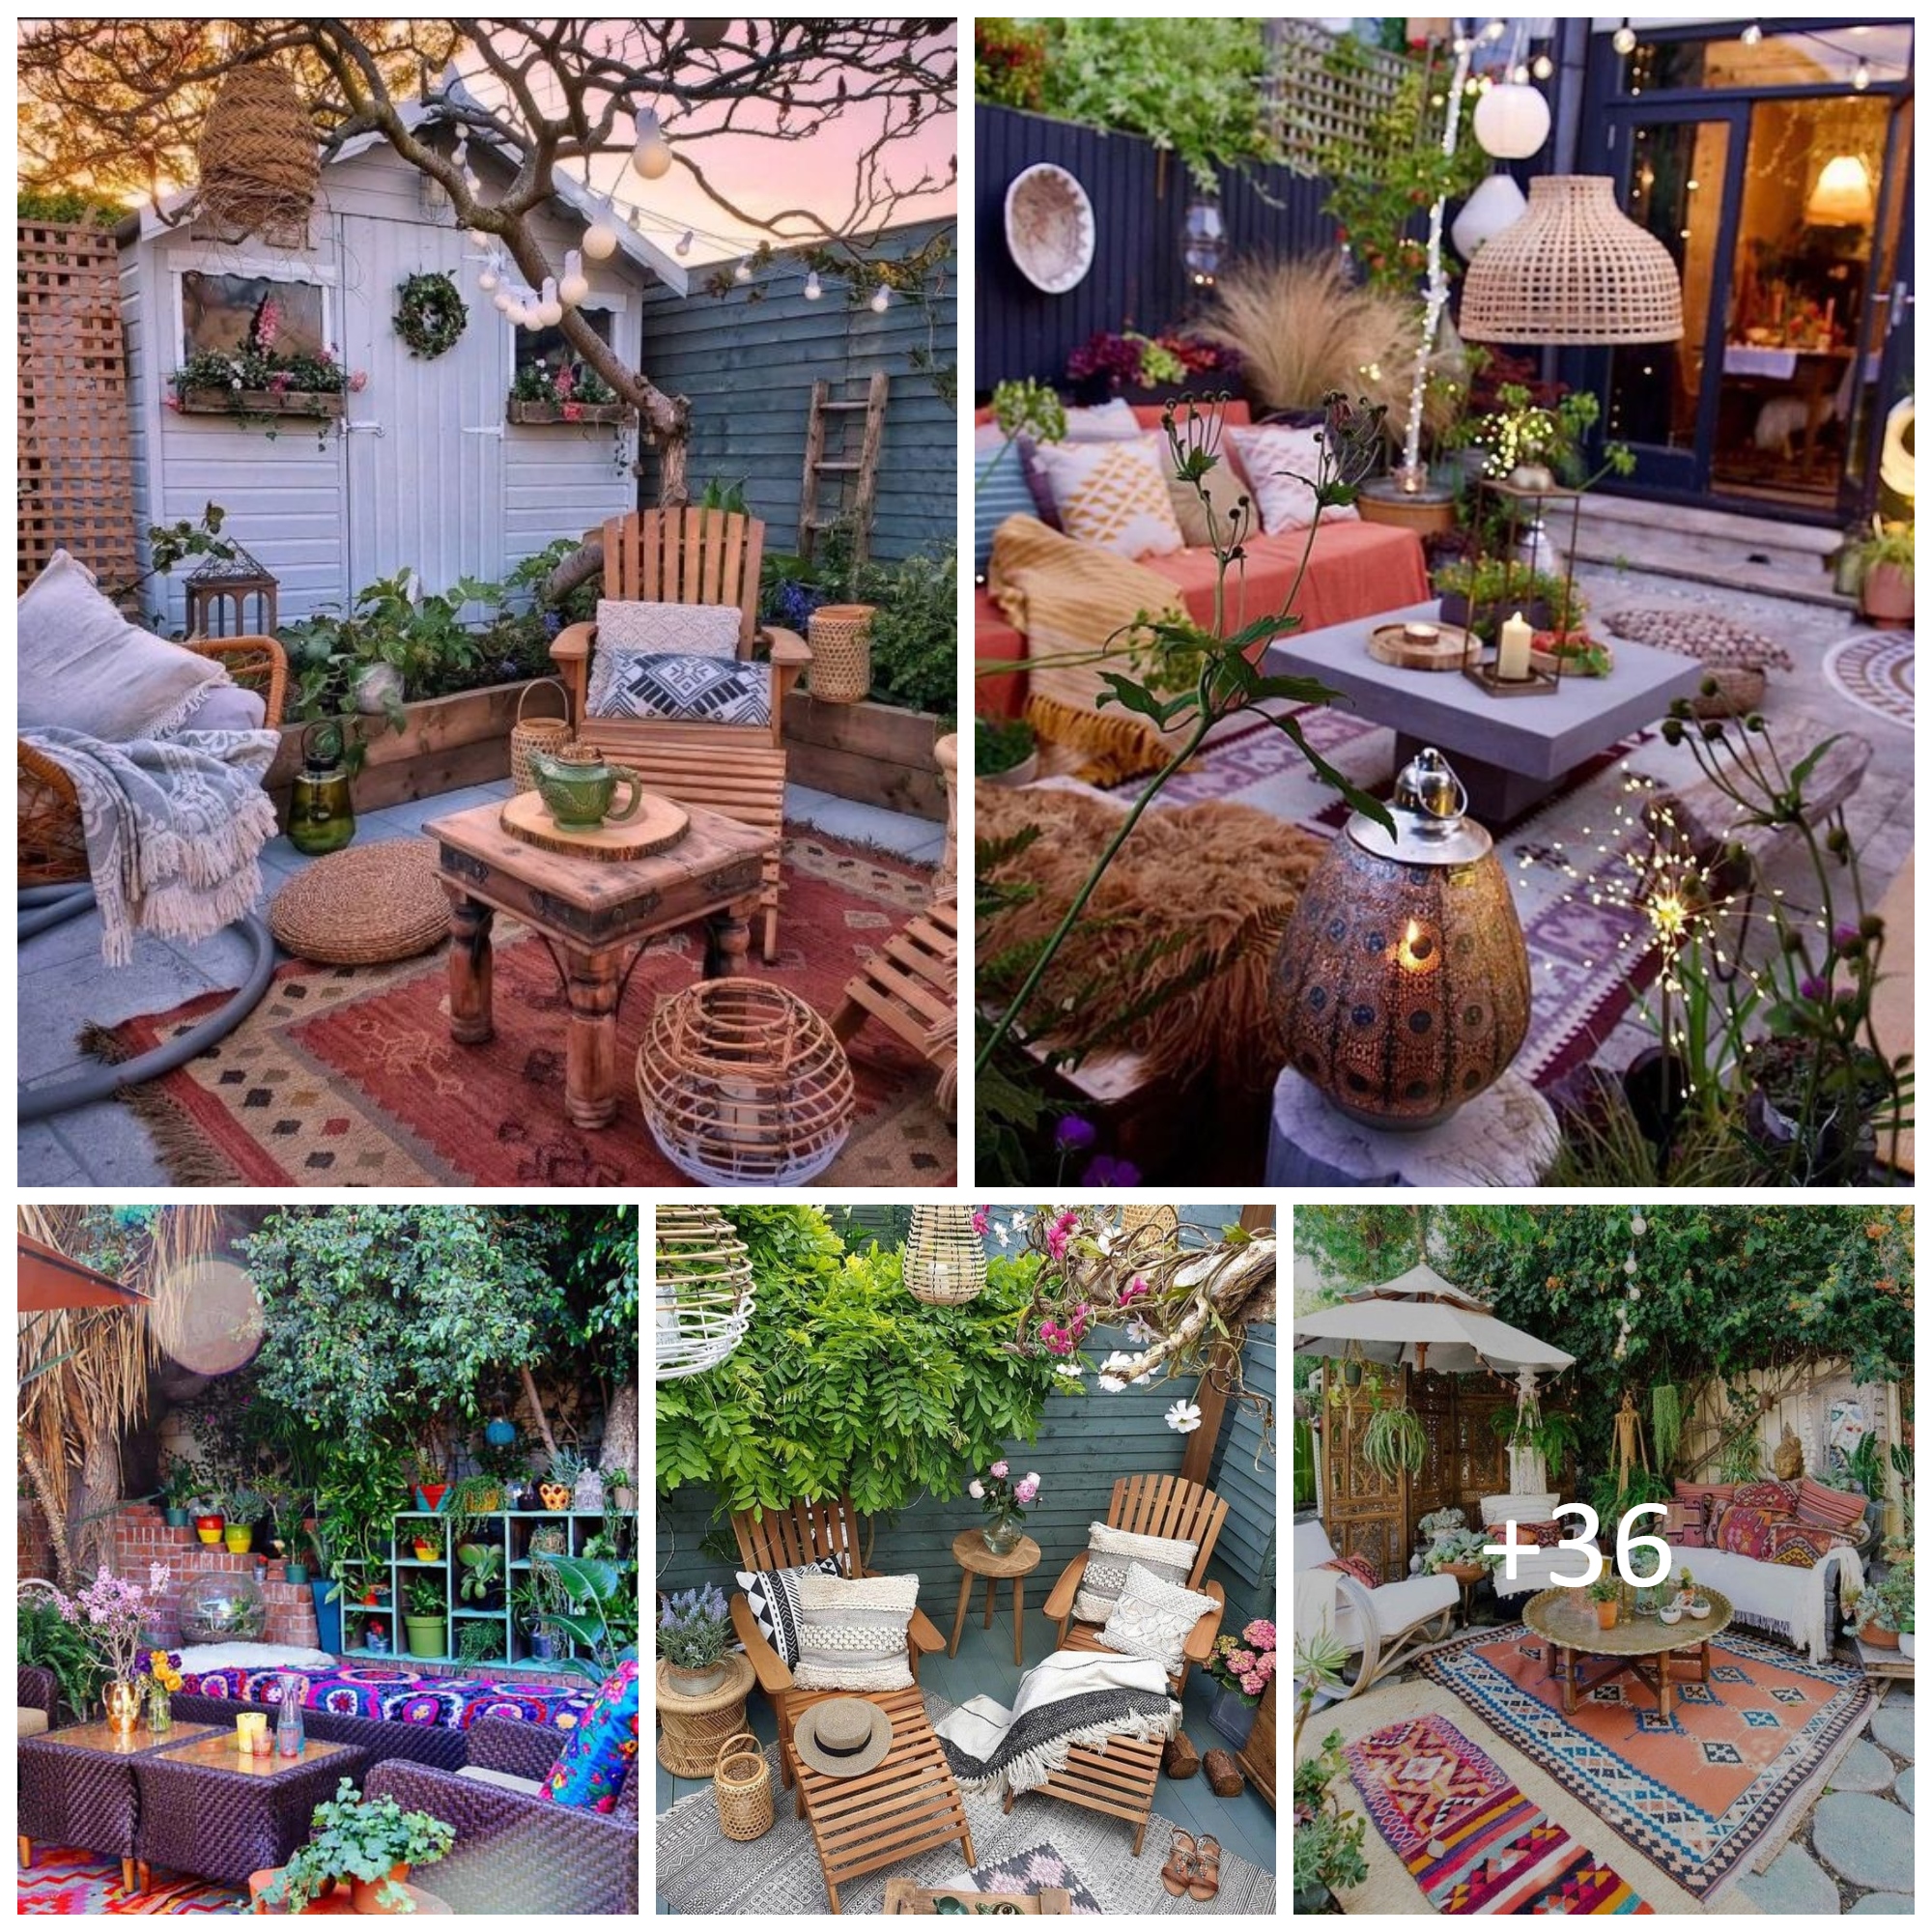 Create a Boho Chic Garden Area With These Simple Tips